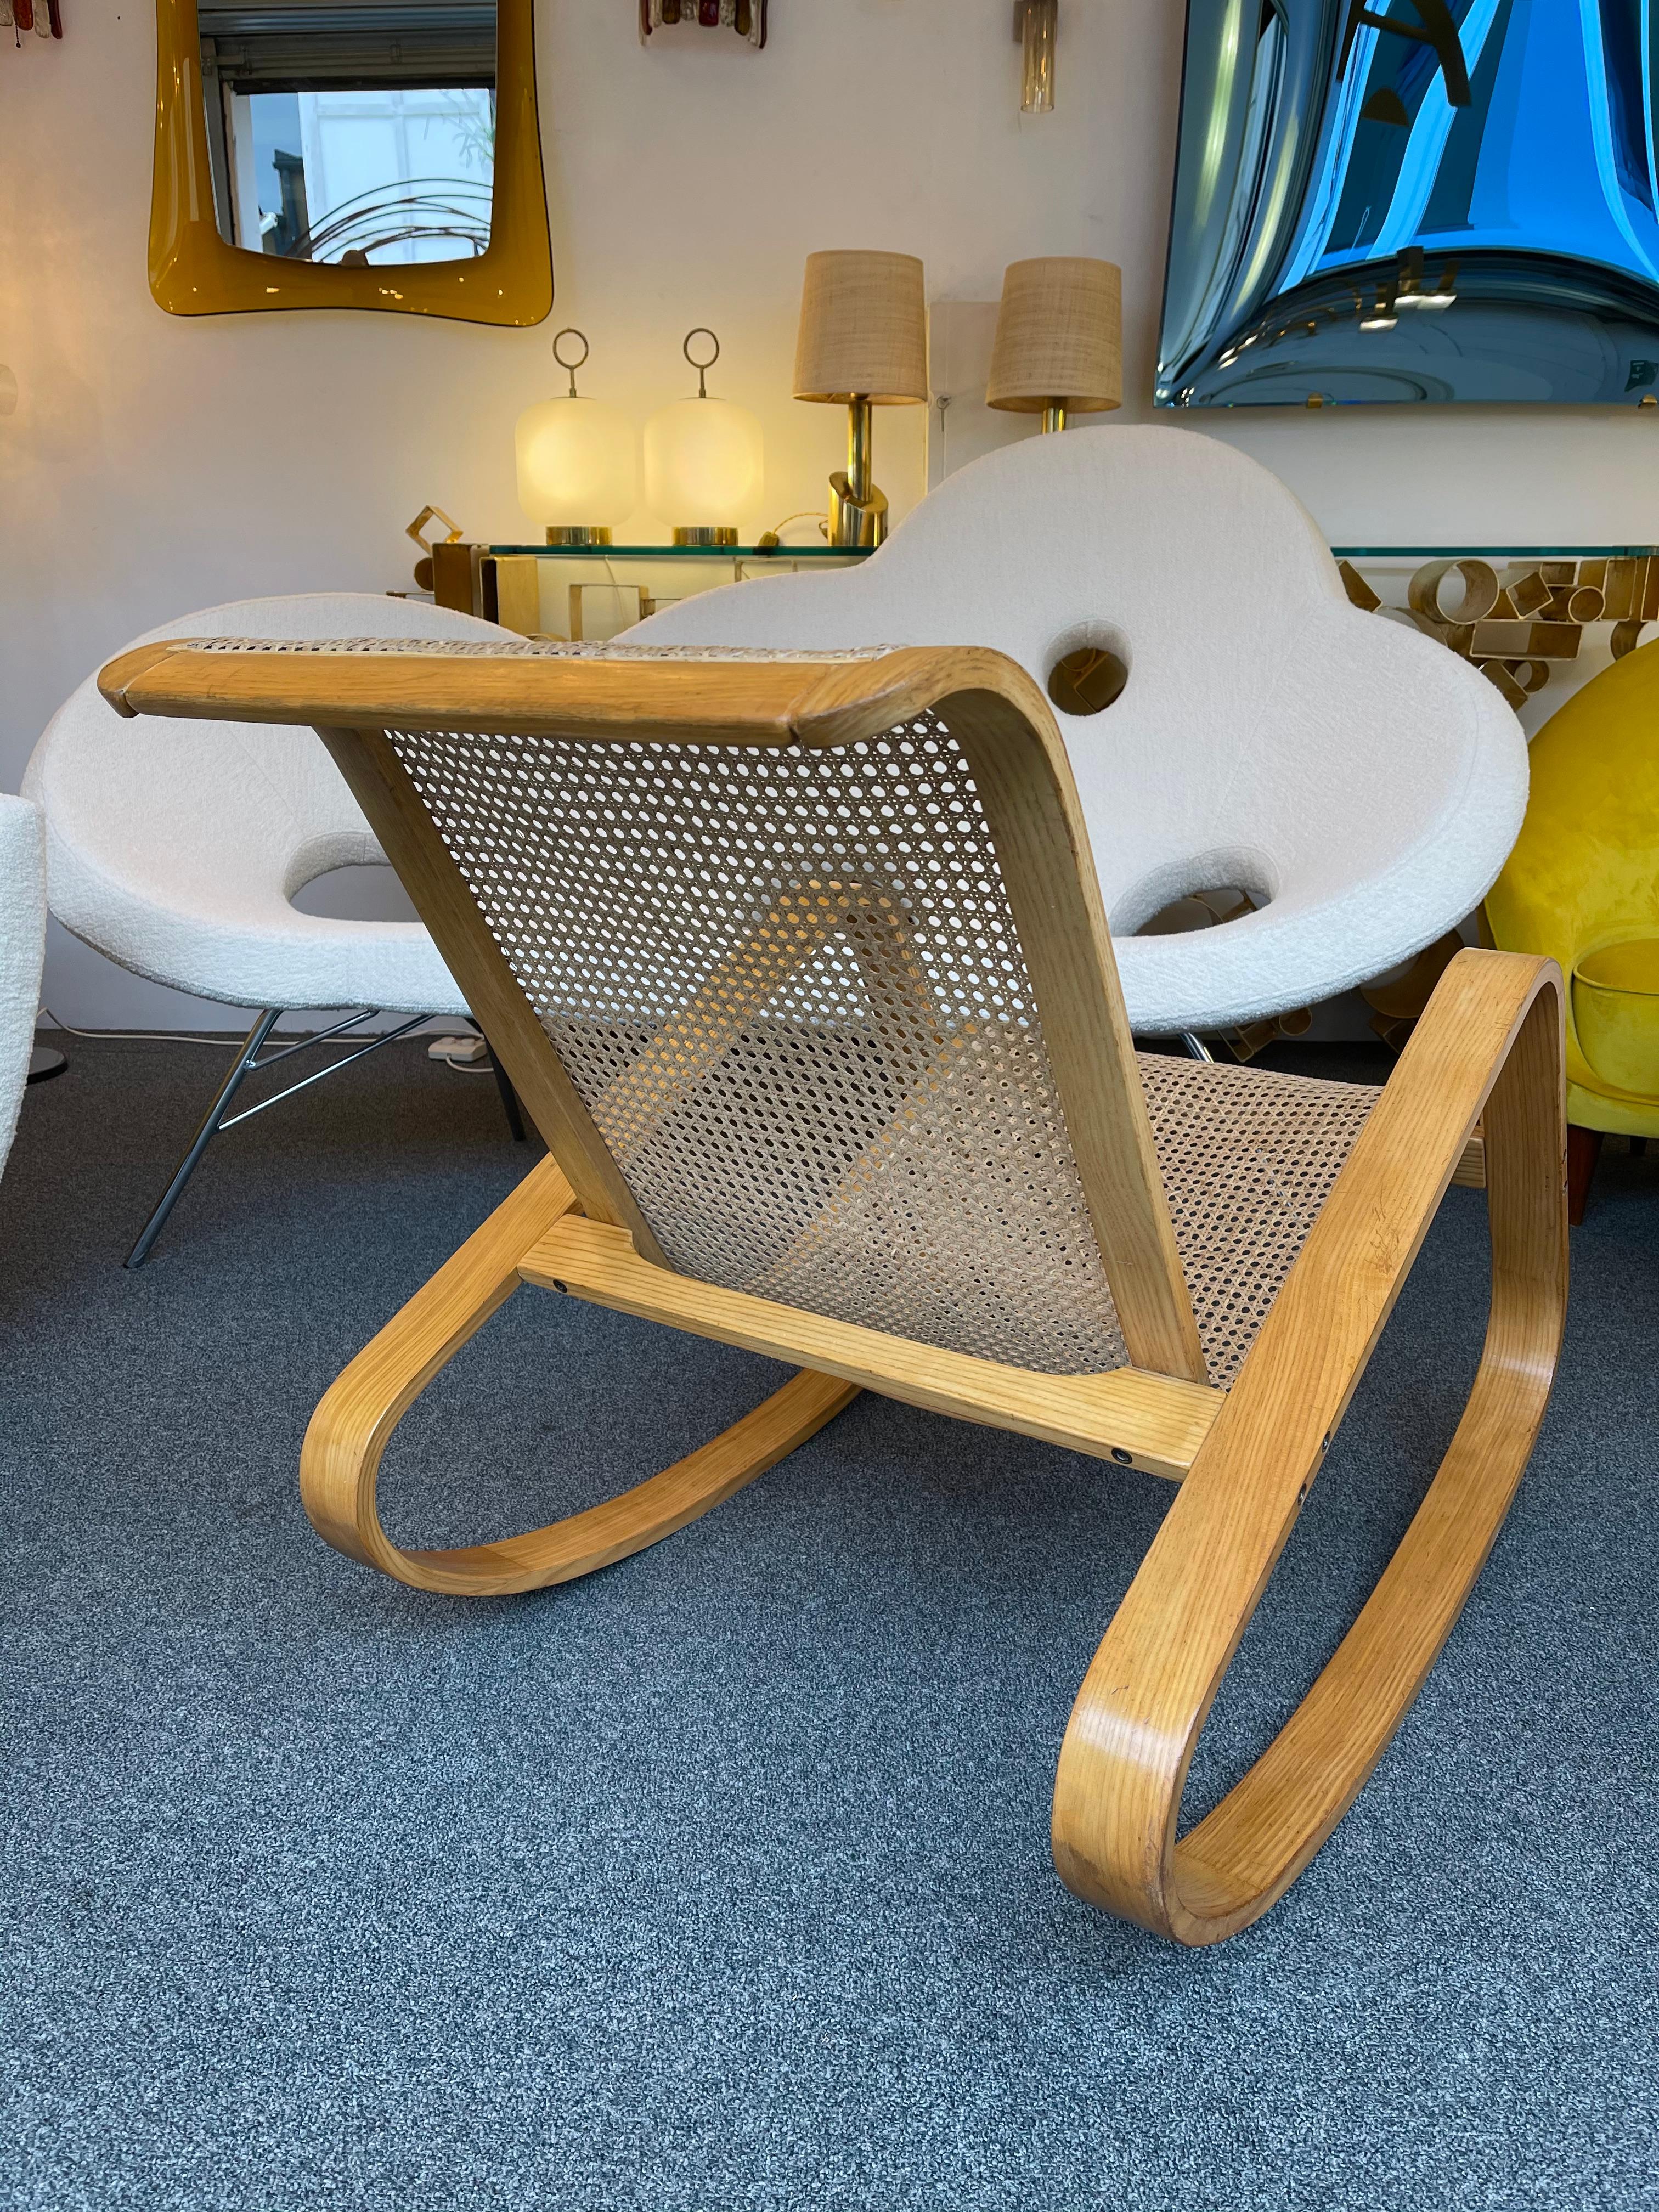 Late 20th Century Wood and Cane Rocking Chair Dondolo by Luigi Crassevig, Italy, 1970s